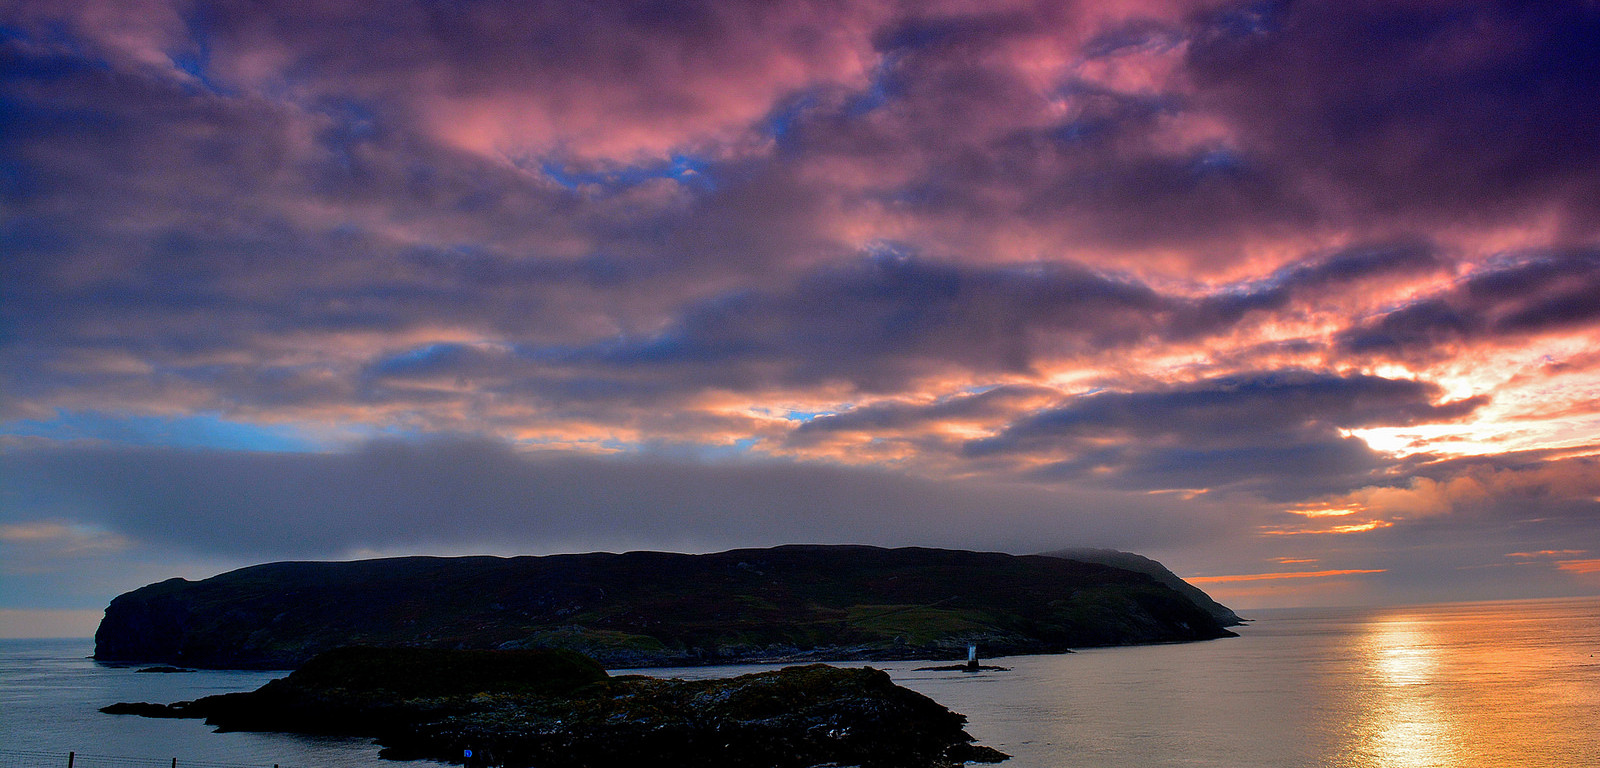 Sunset on the Calf of Man by Tee Cee (CC-by-2.0) https://www.flickr.com/photos/tcee35mm/15388495356